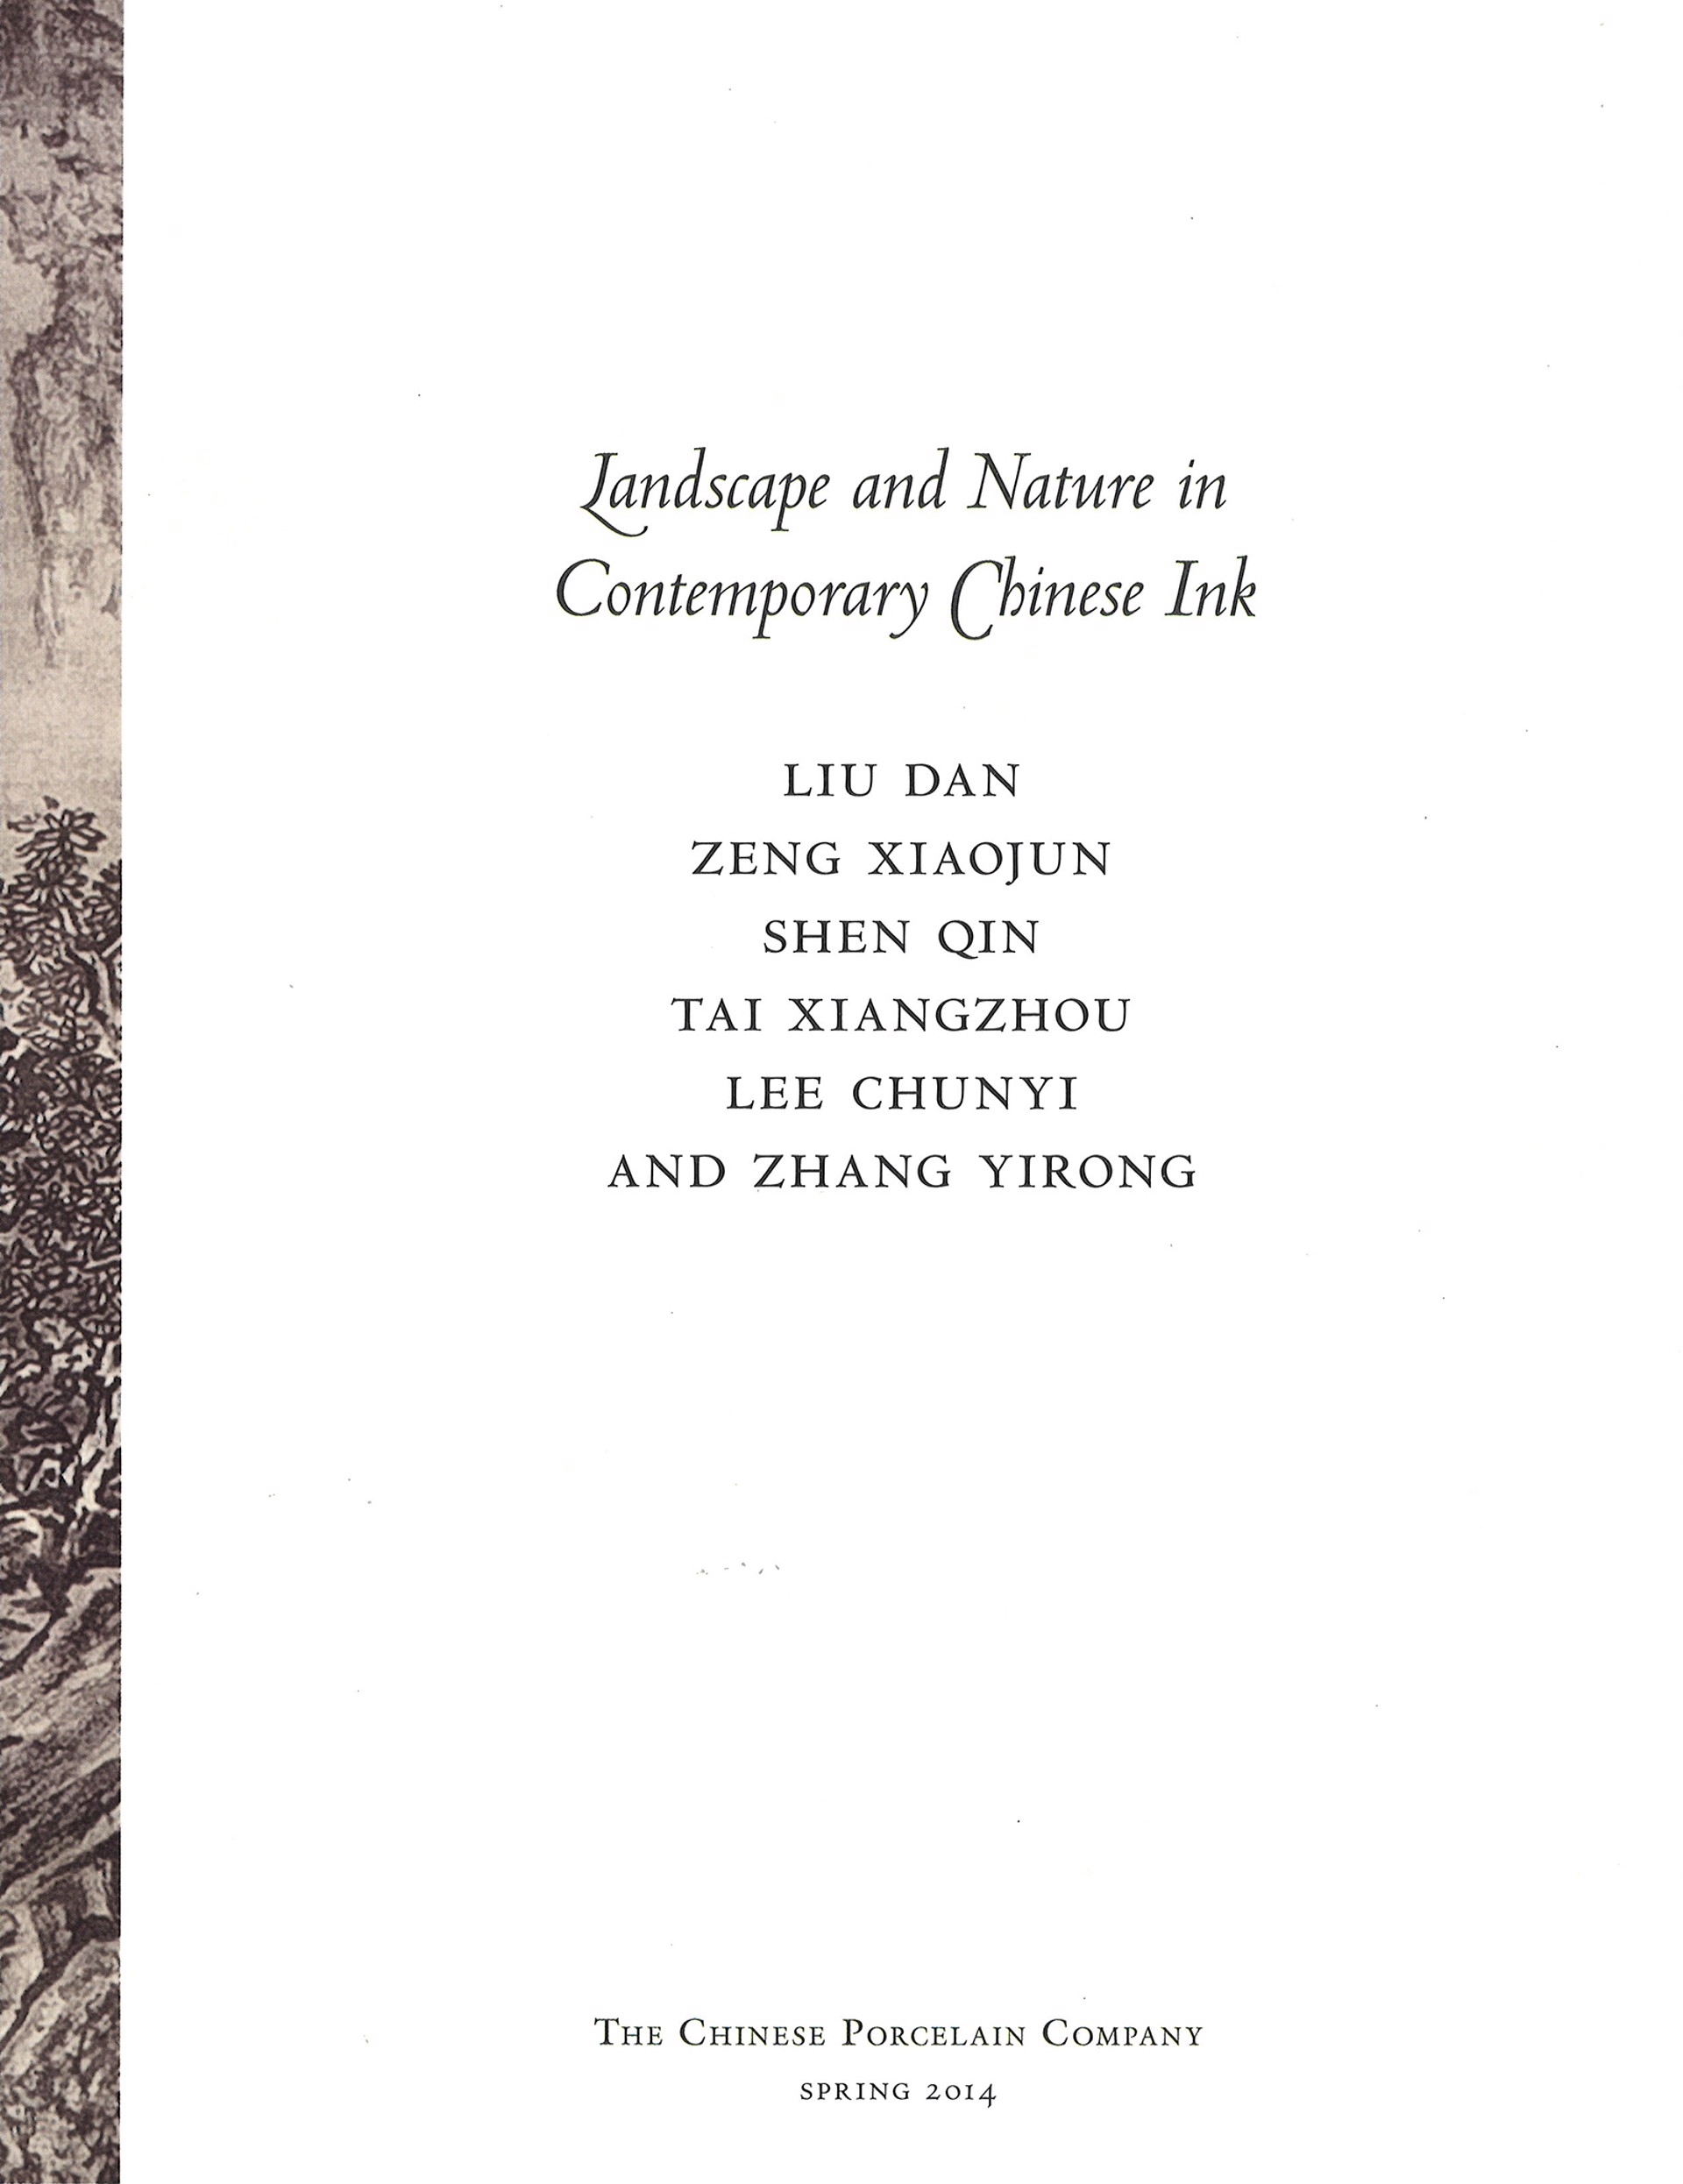 Landscape and Nature in Contemporary Chinese Ink by Brochure 17